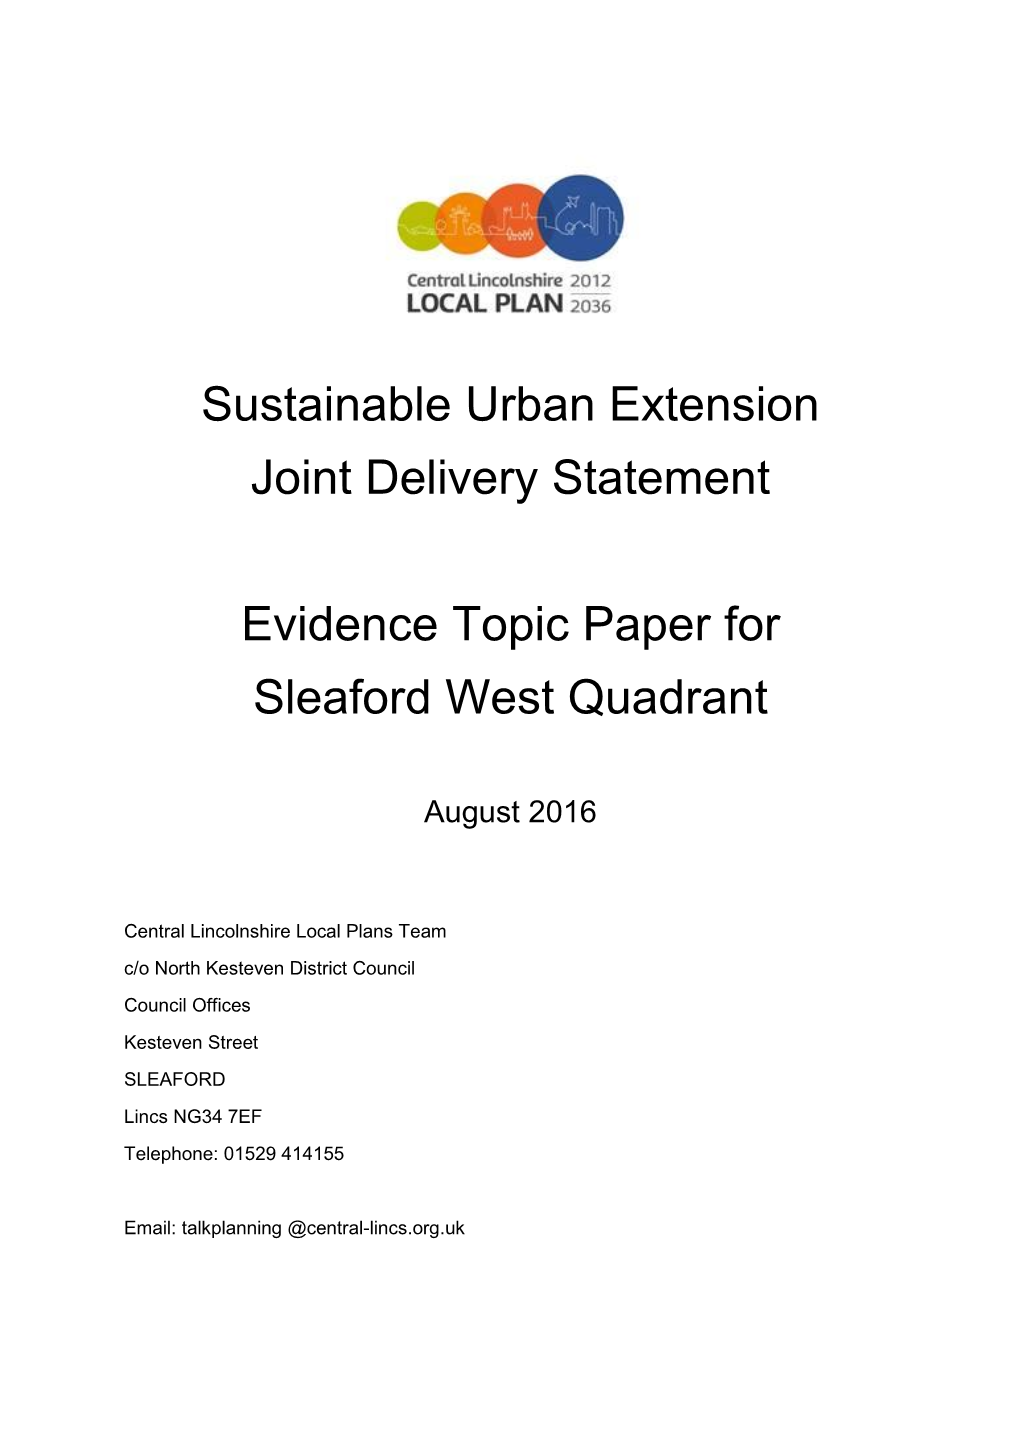 Sustainable Urban Extension Topic Paper Sleaford West Quadrant